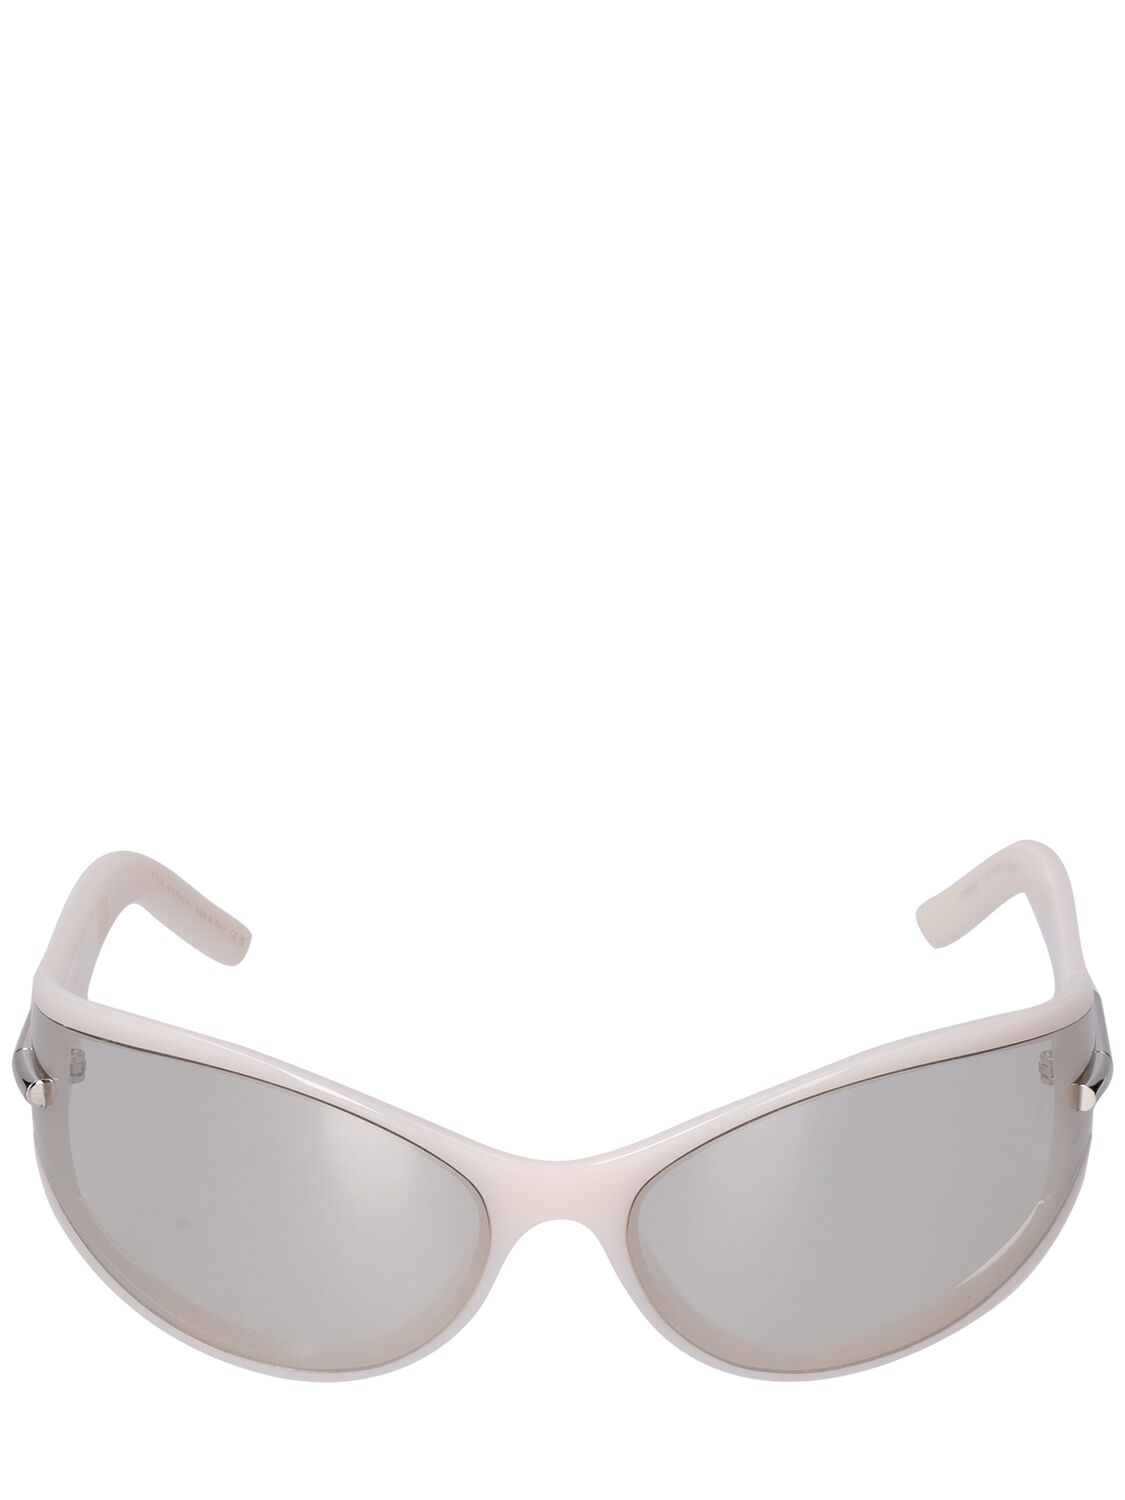 Givenchy Mask Sunglasses In Gray